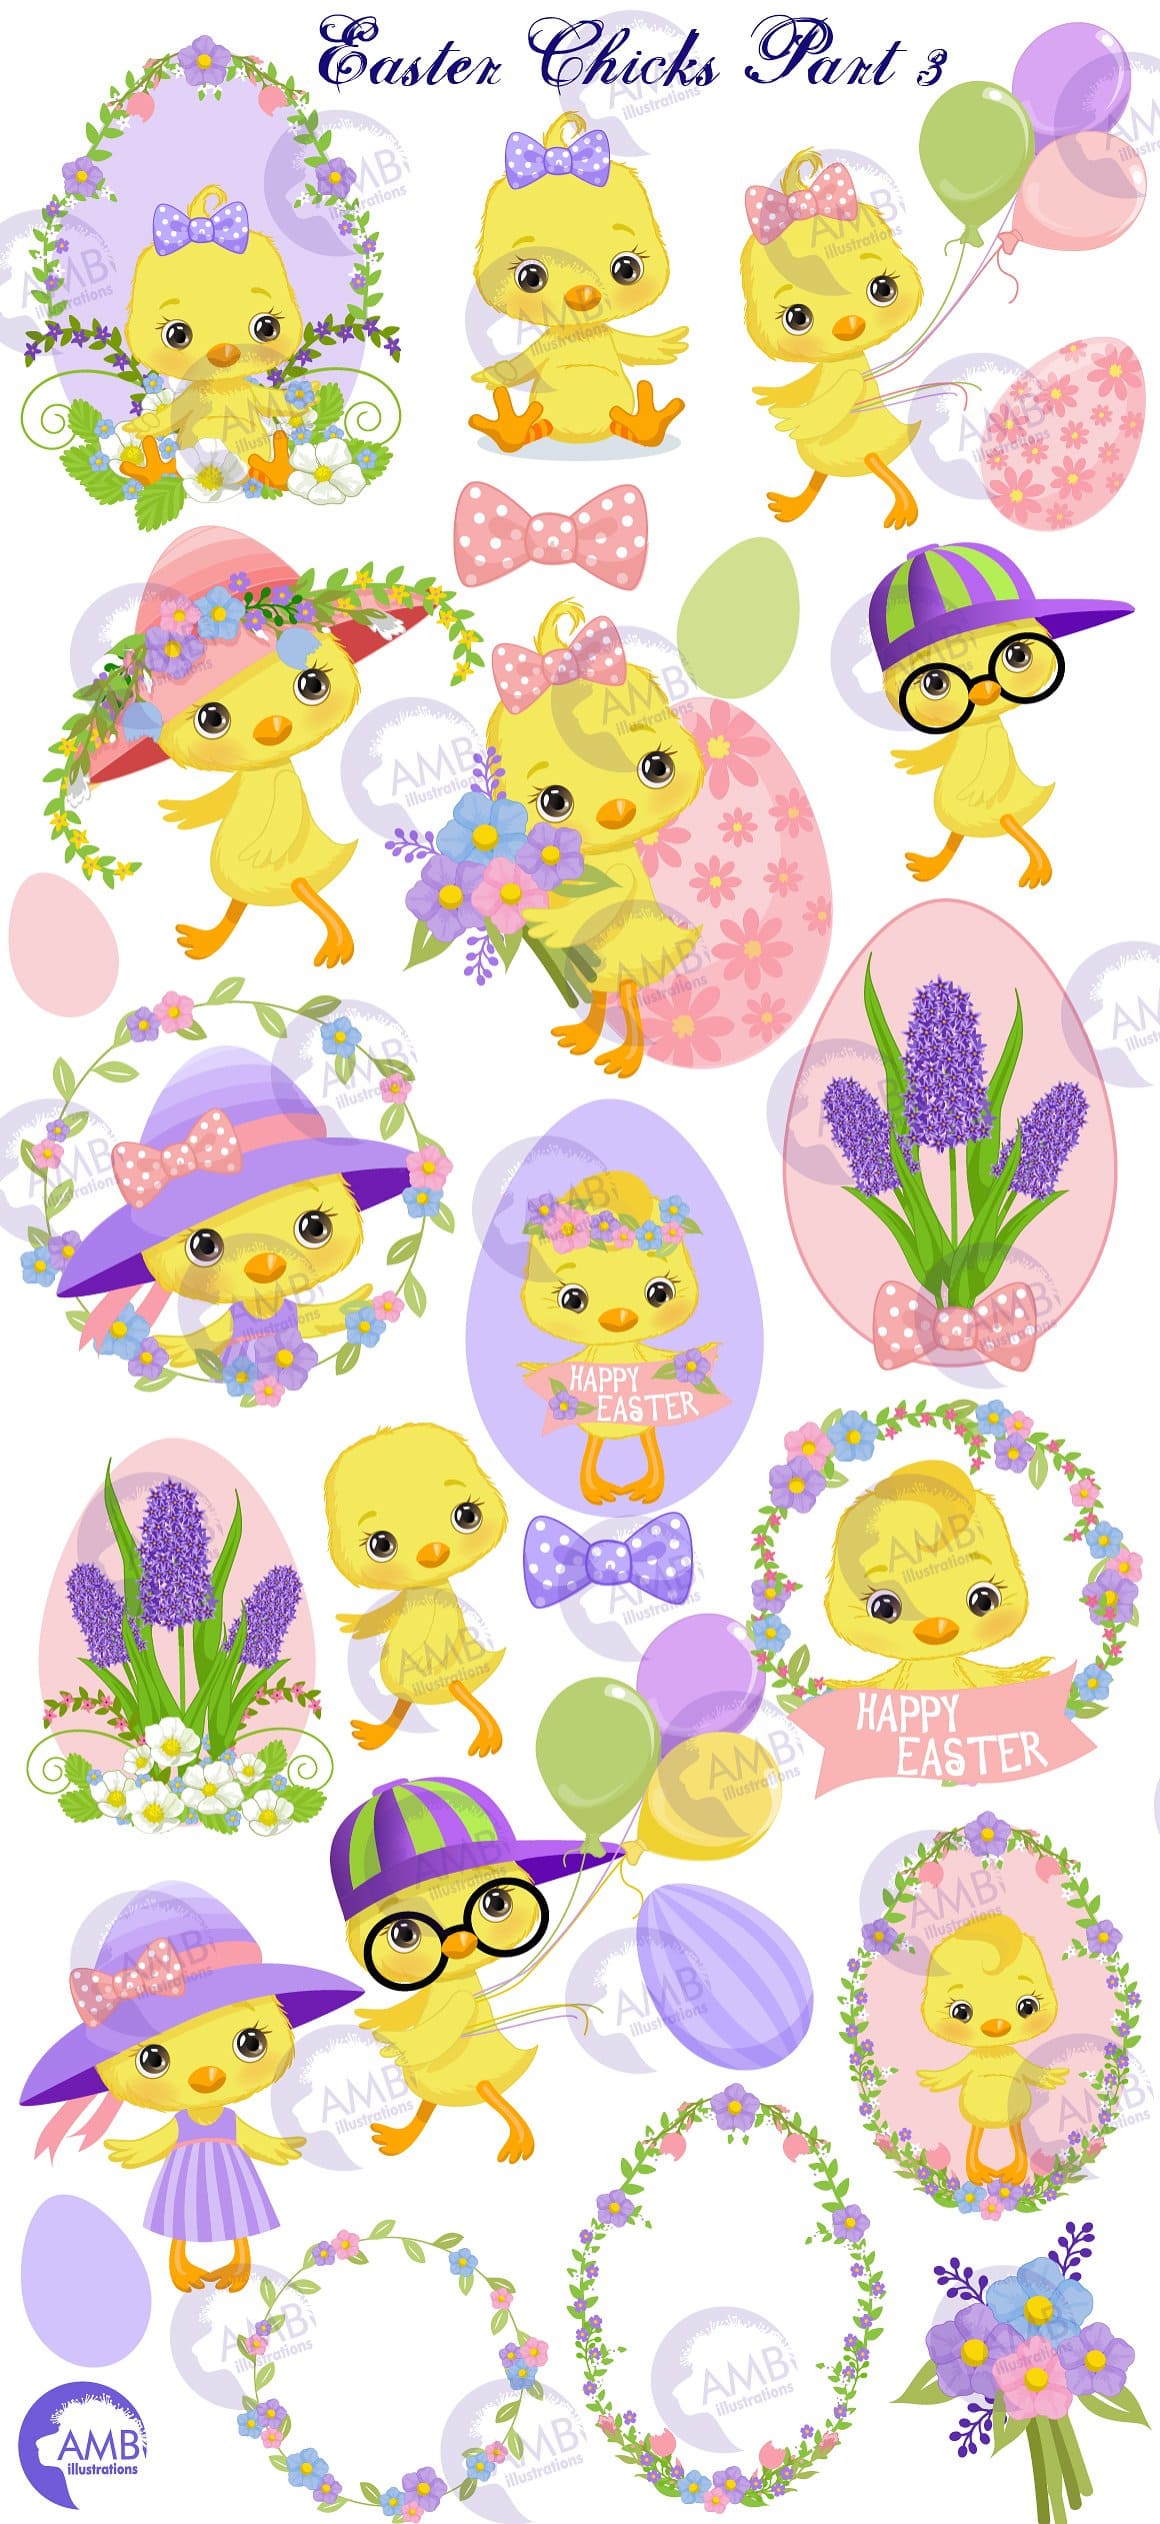 Chickens with flowers and inscriptions about Happy Easter are depicted on a white background.